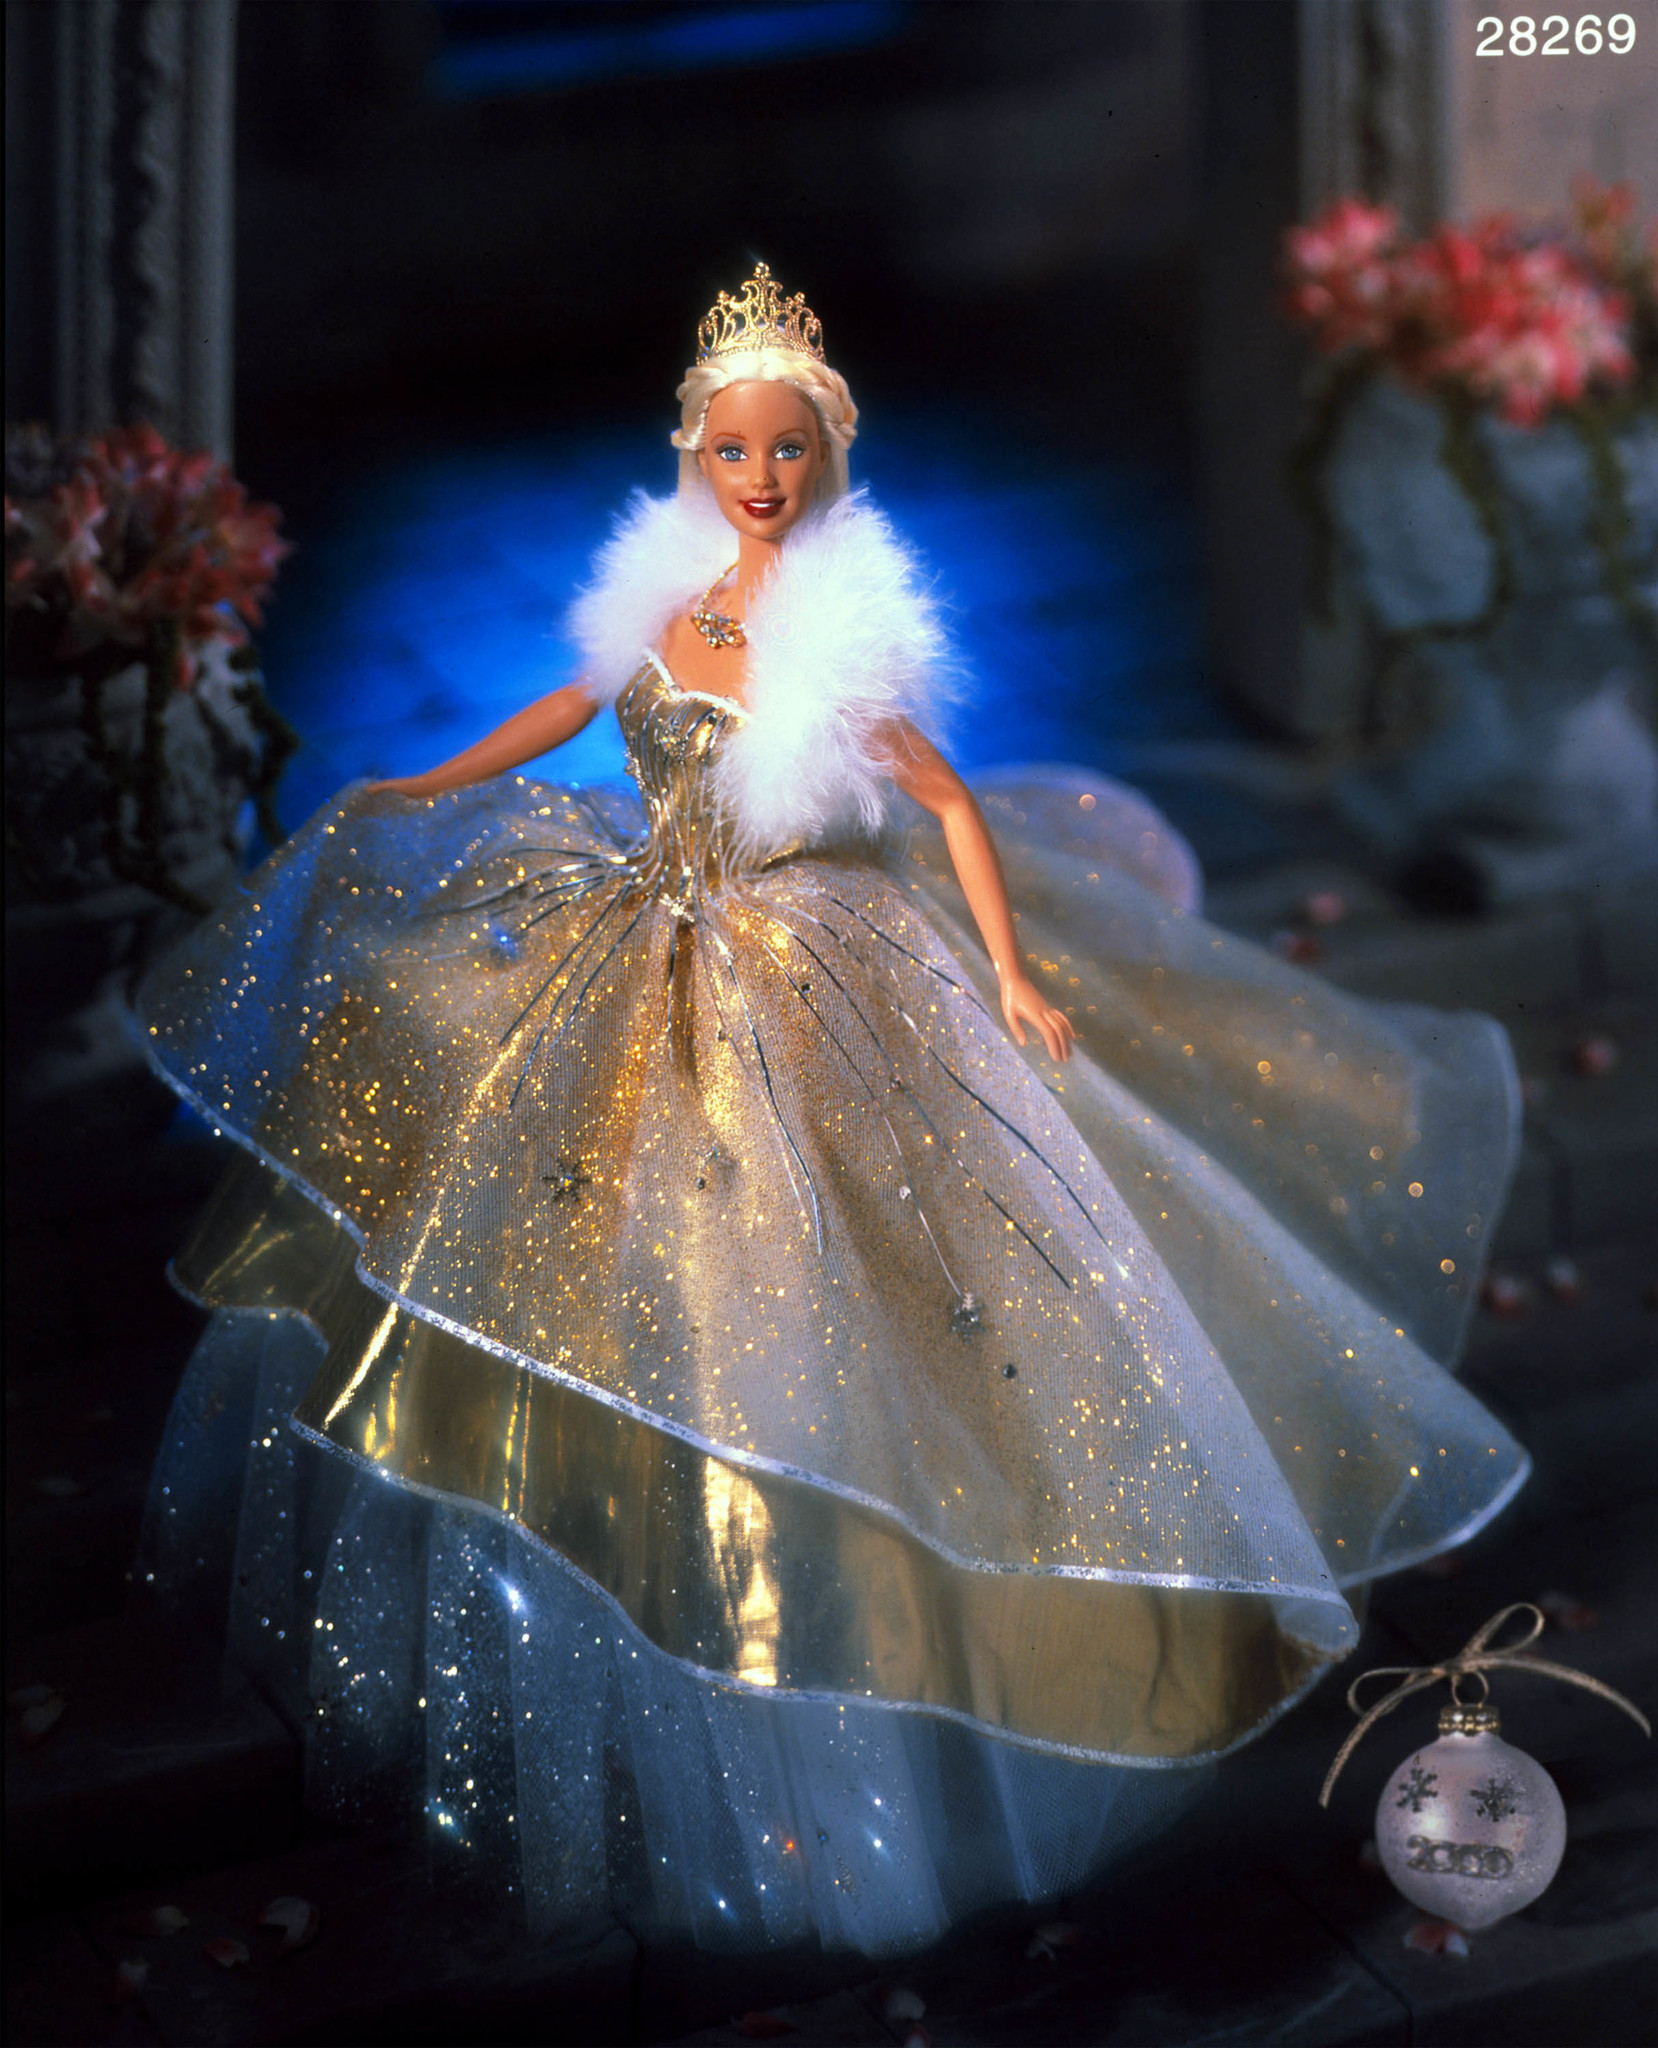 New Millenium Barbie, decked out in gold and ivory finery, was the first collectible doll of the new millennium.